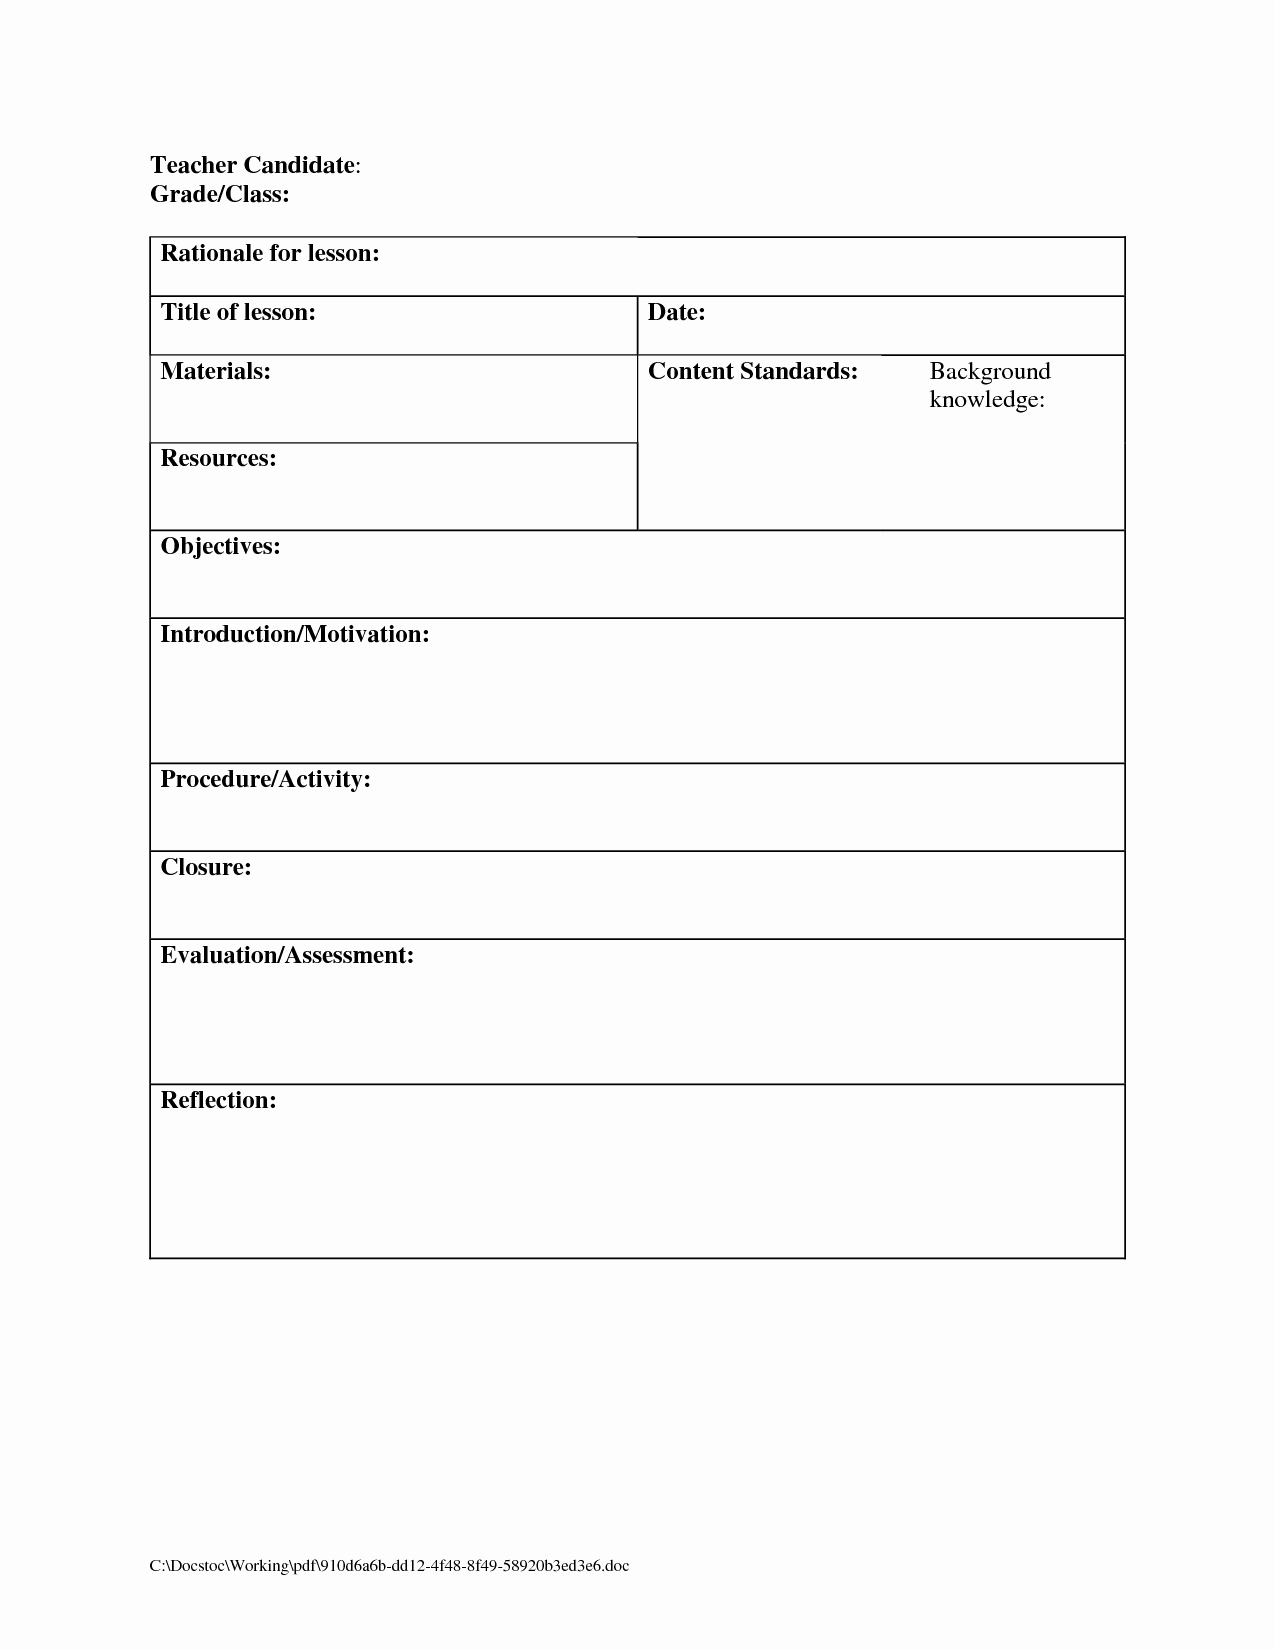 Blank Lesson Plan Template Awesome Printable Blank Lesson Plans form for Counselors